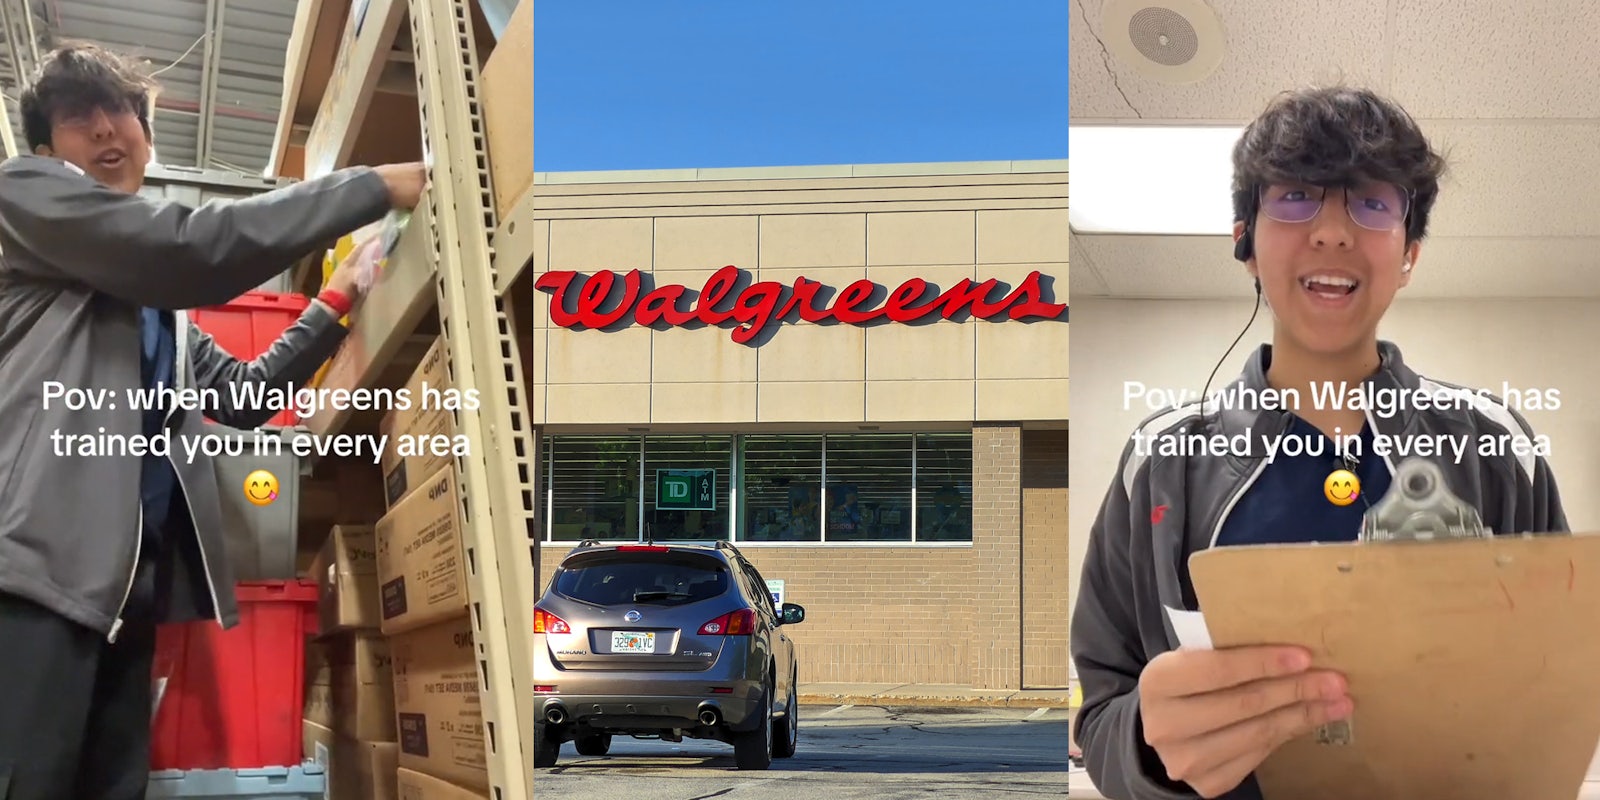 Walgreens employee with caption 'Pov: when Walgreens has trained you in every area' (l) Walgreens building with sign (c) Walgreens employee with caption 'Pov: when Walgreens has trained you in every area' (r)